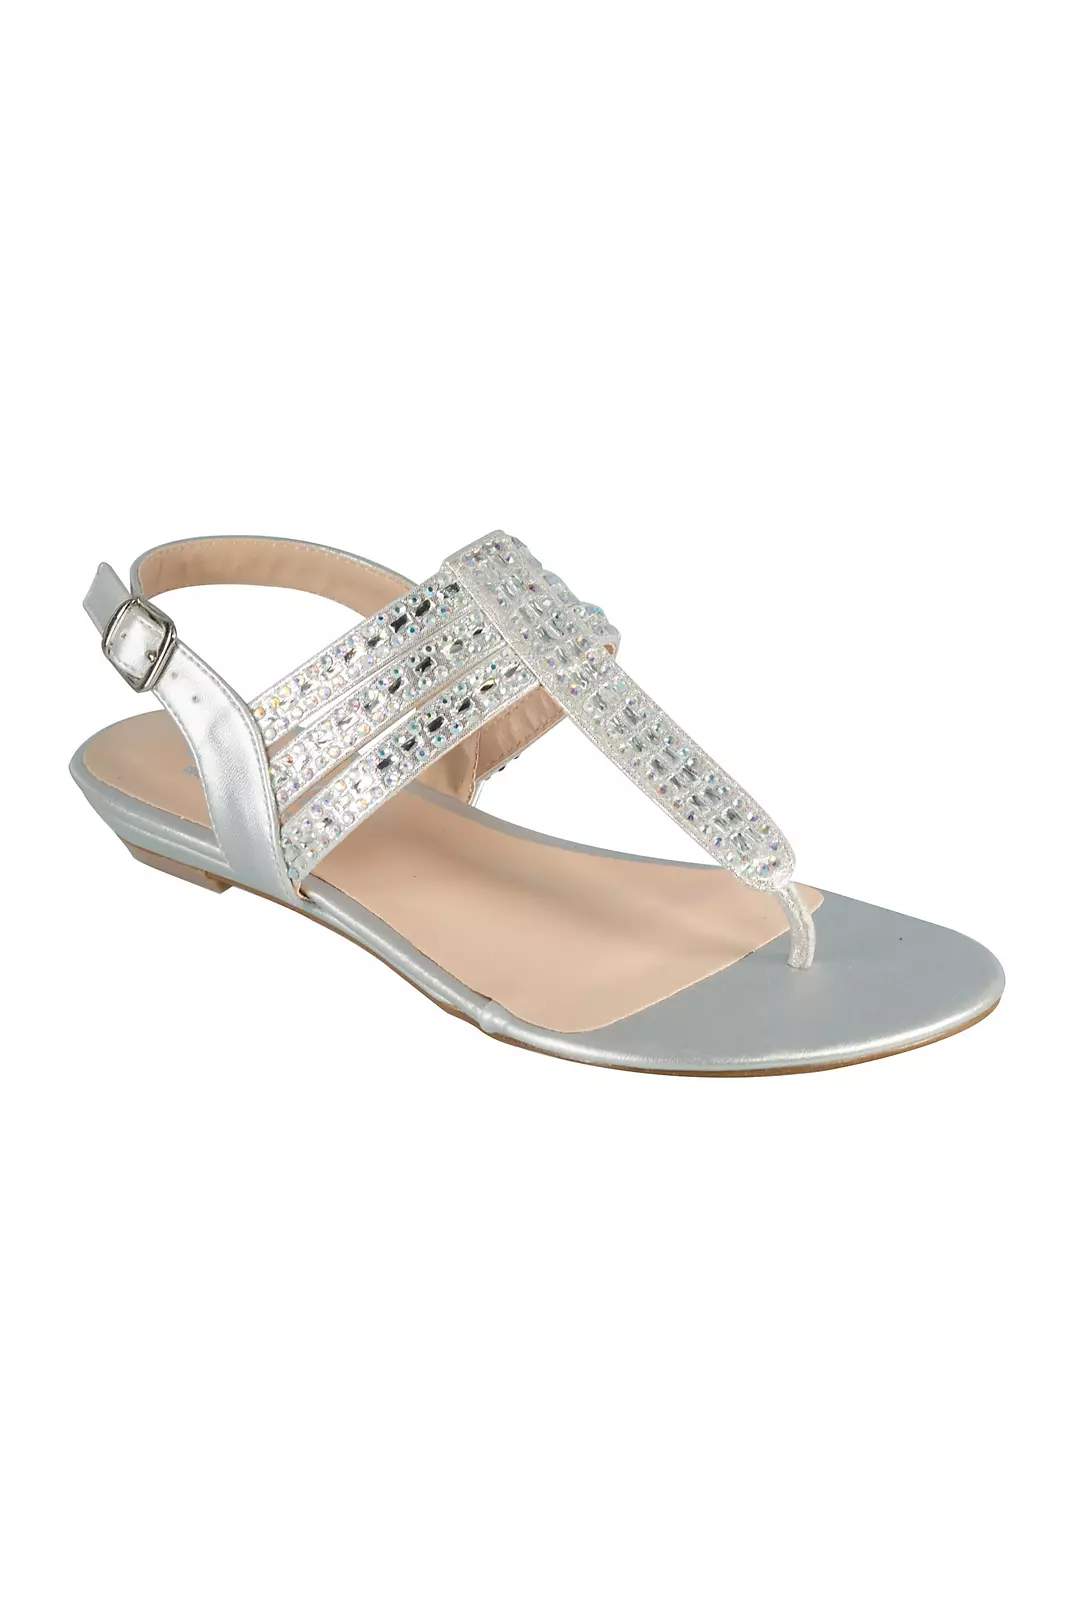 Strappy Slingback Sandals with Iridescent Crystals Image